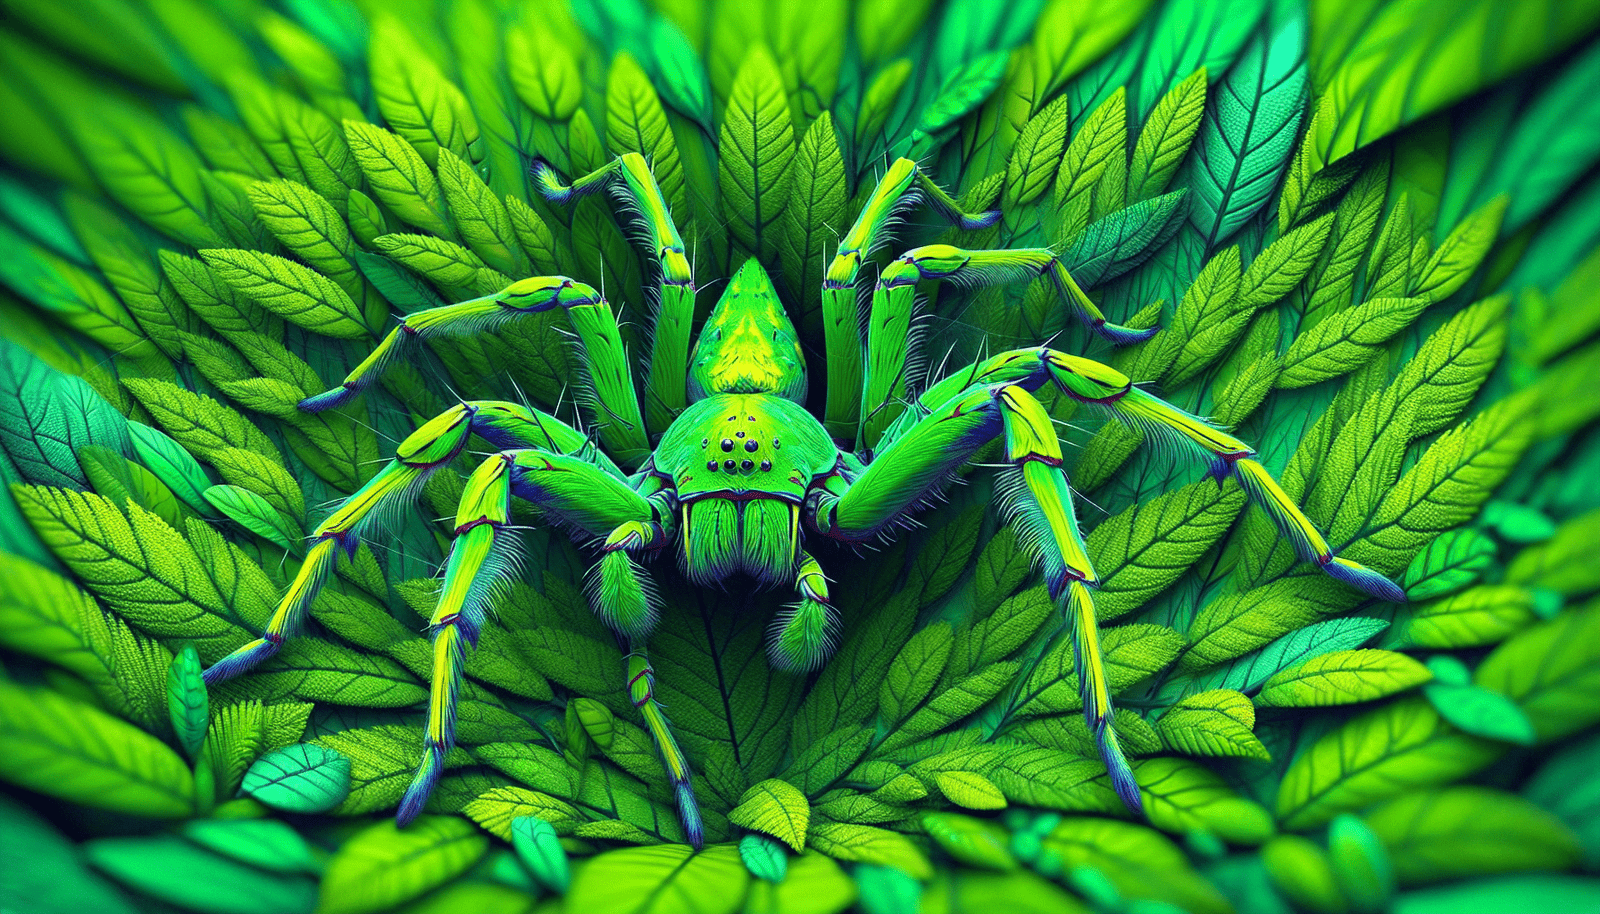 How Do You Replicate The Natural Environment Of The Enigmatic Green Lantern Flycatcher Spider?